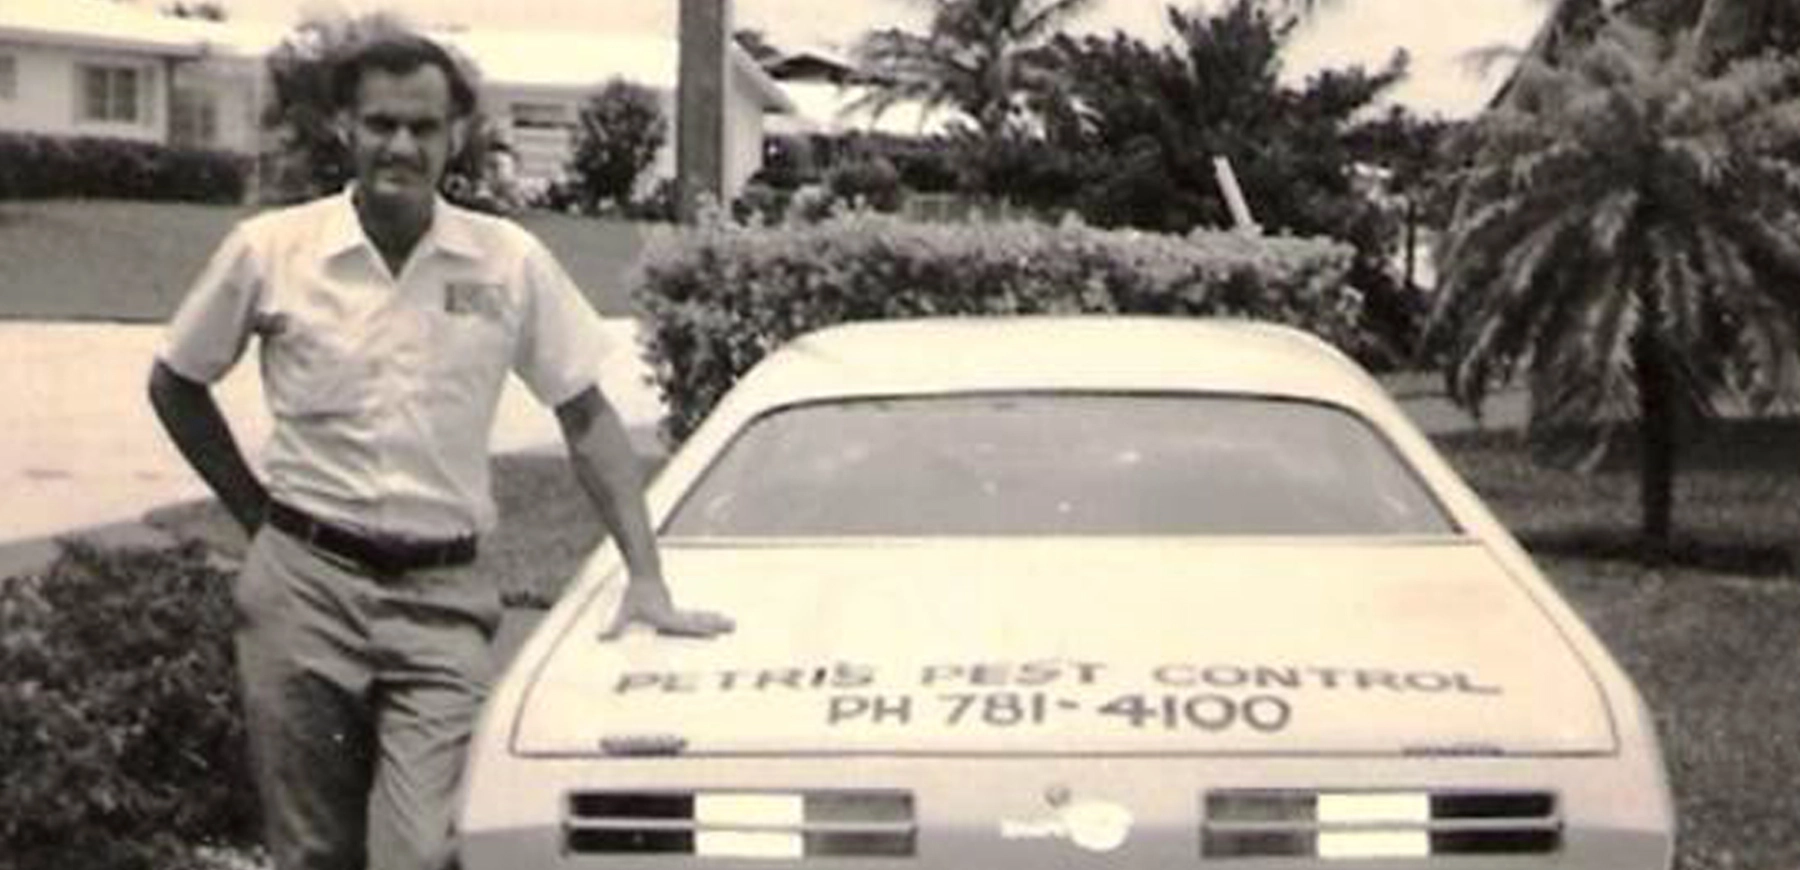 History of Petri Pest by Petri Pest Control in South Florida